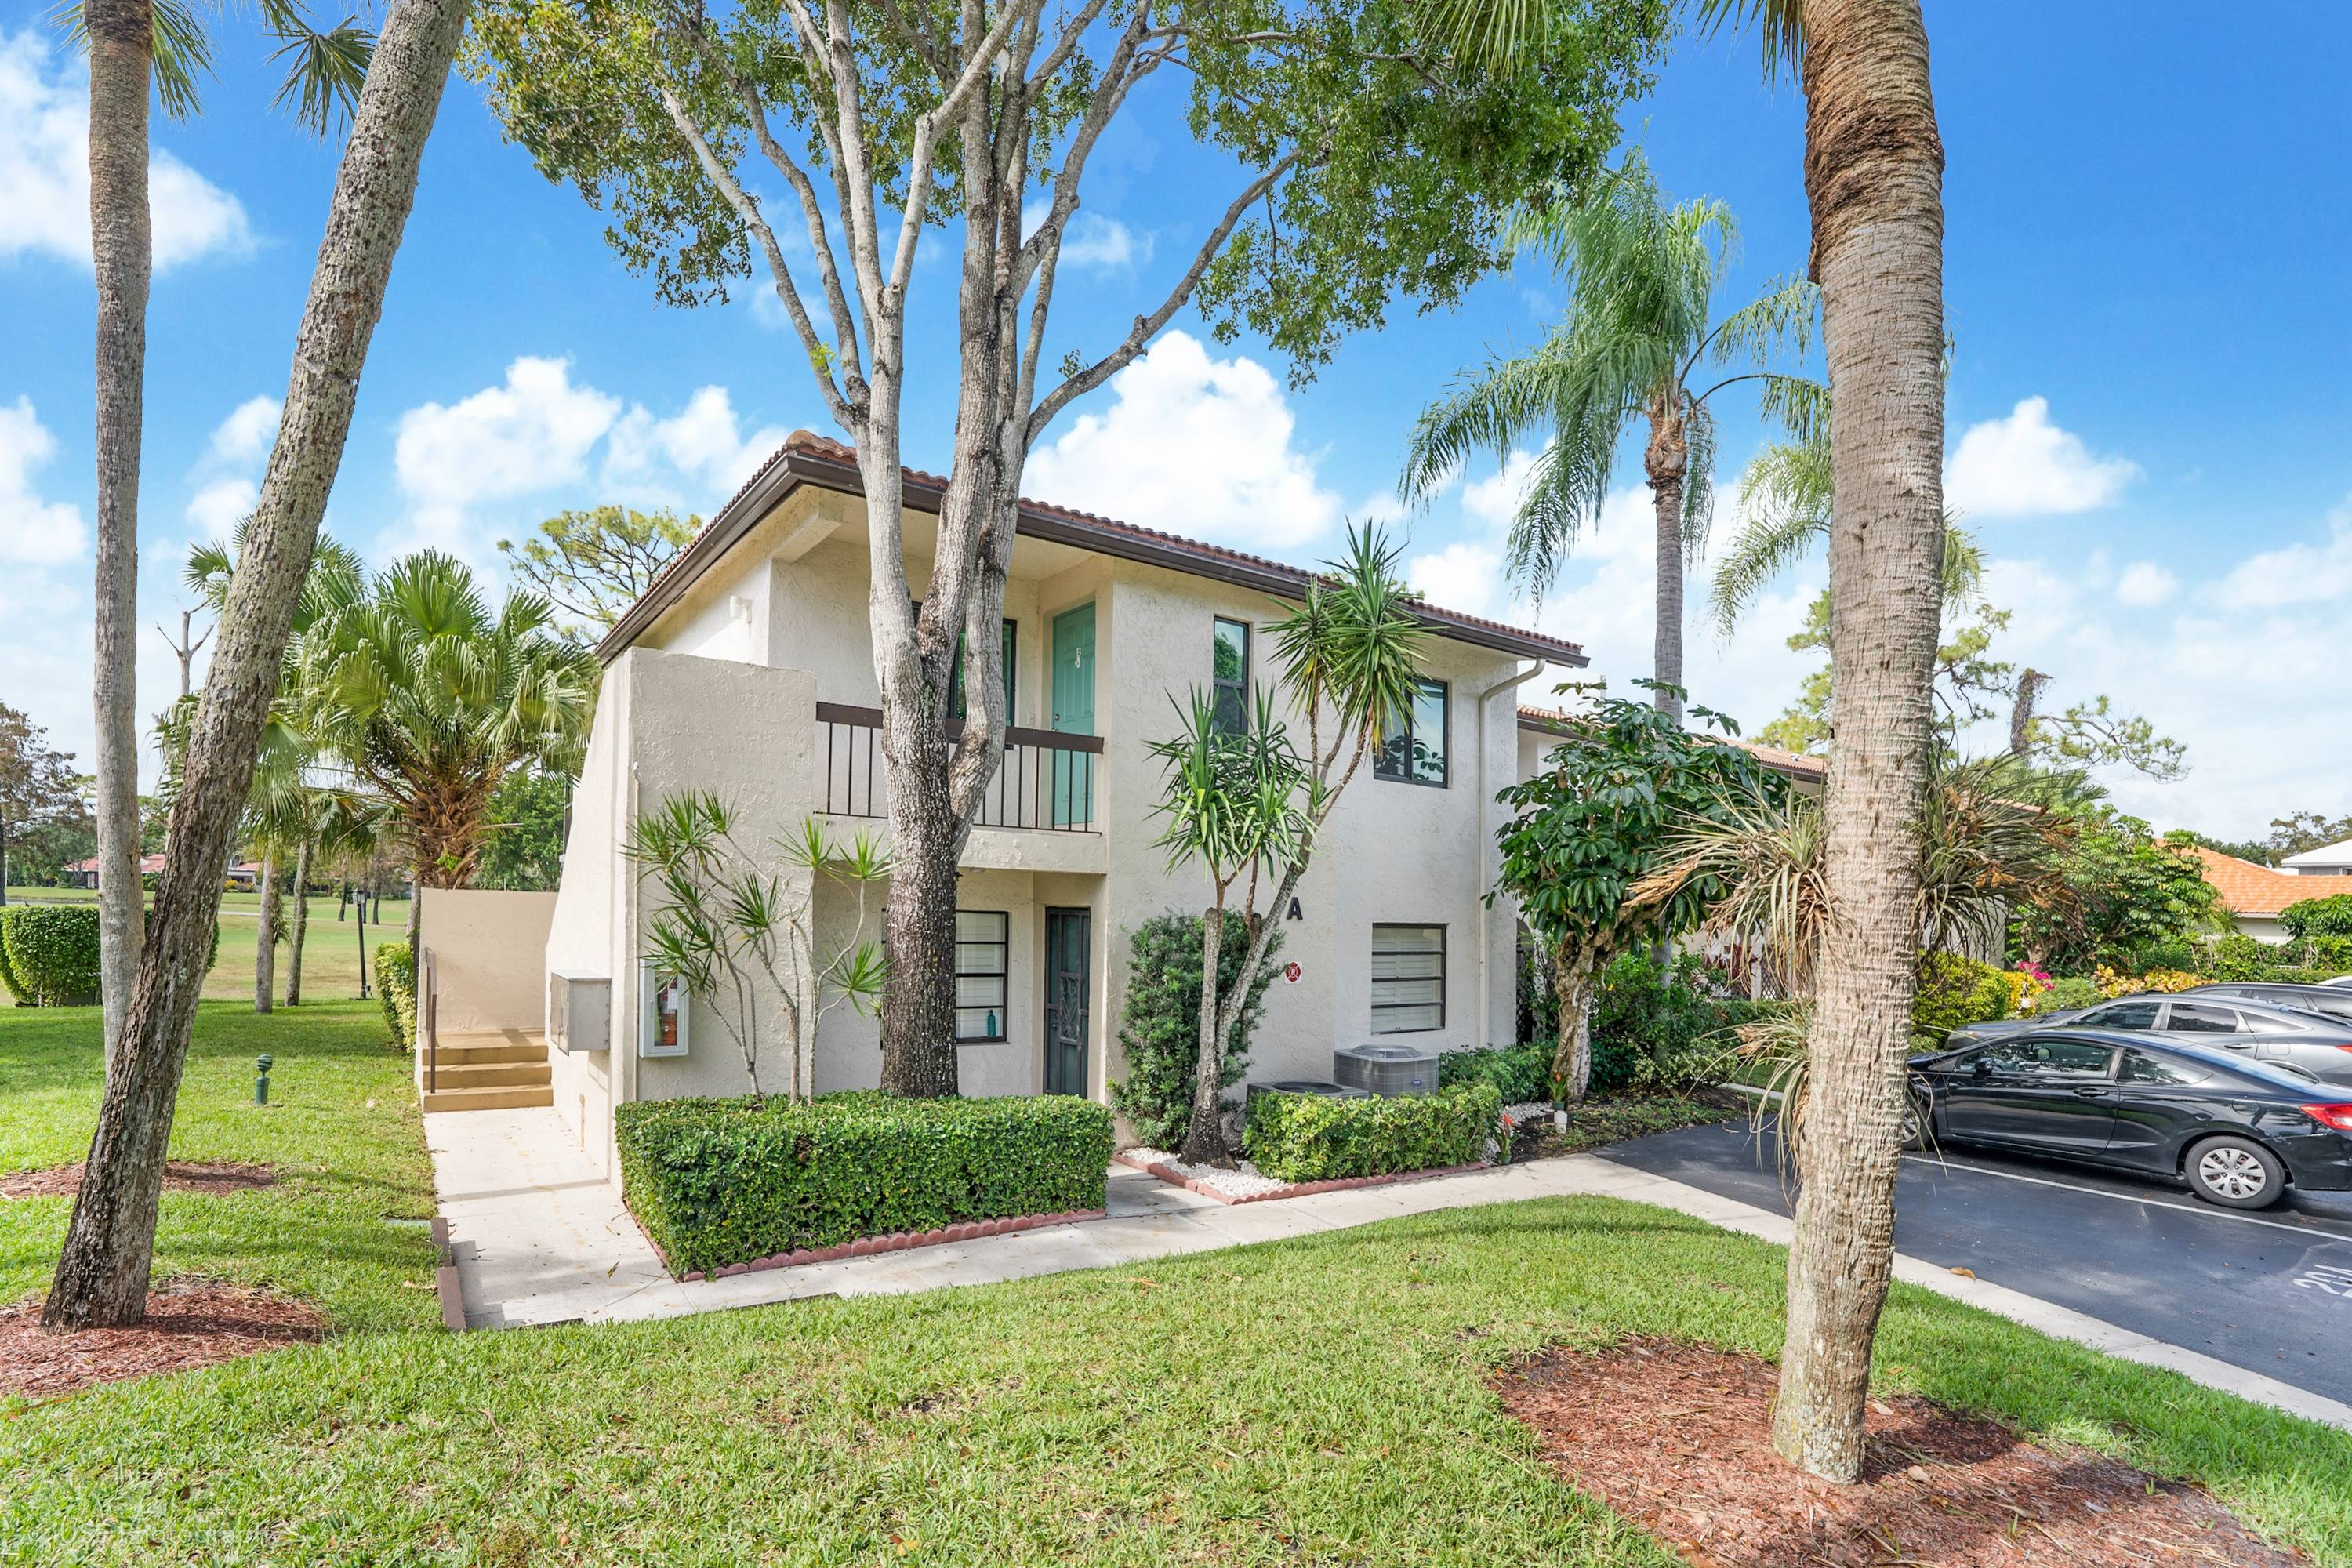 Boca Raton Completely Renovated |2 beds| 2 baths| 1216 sf | Golf Course Views And Access |